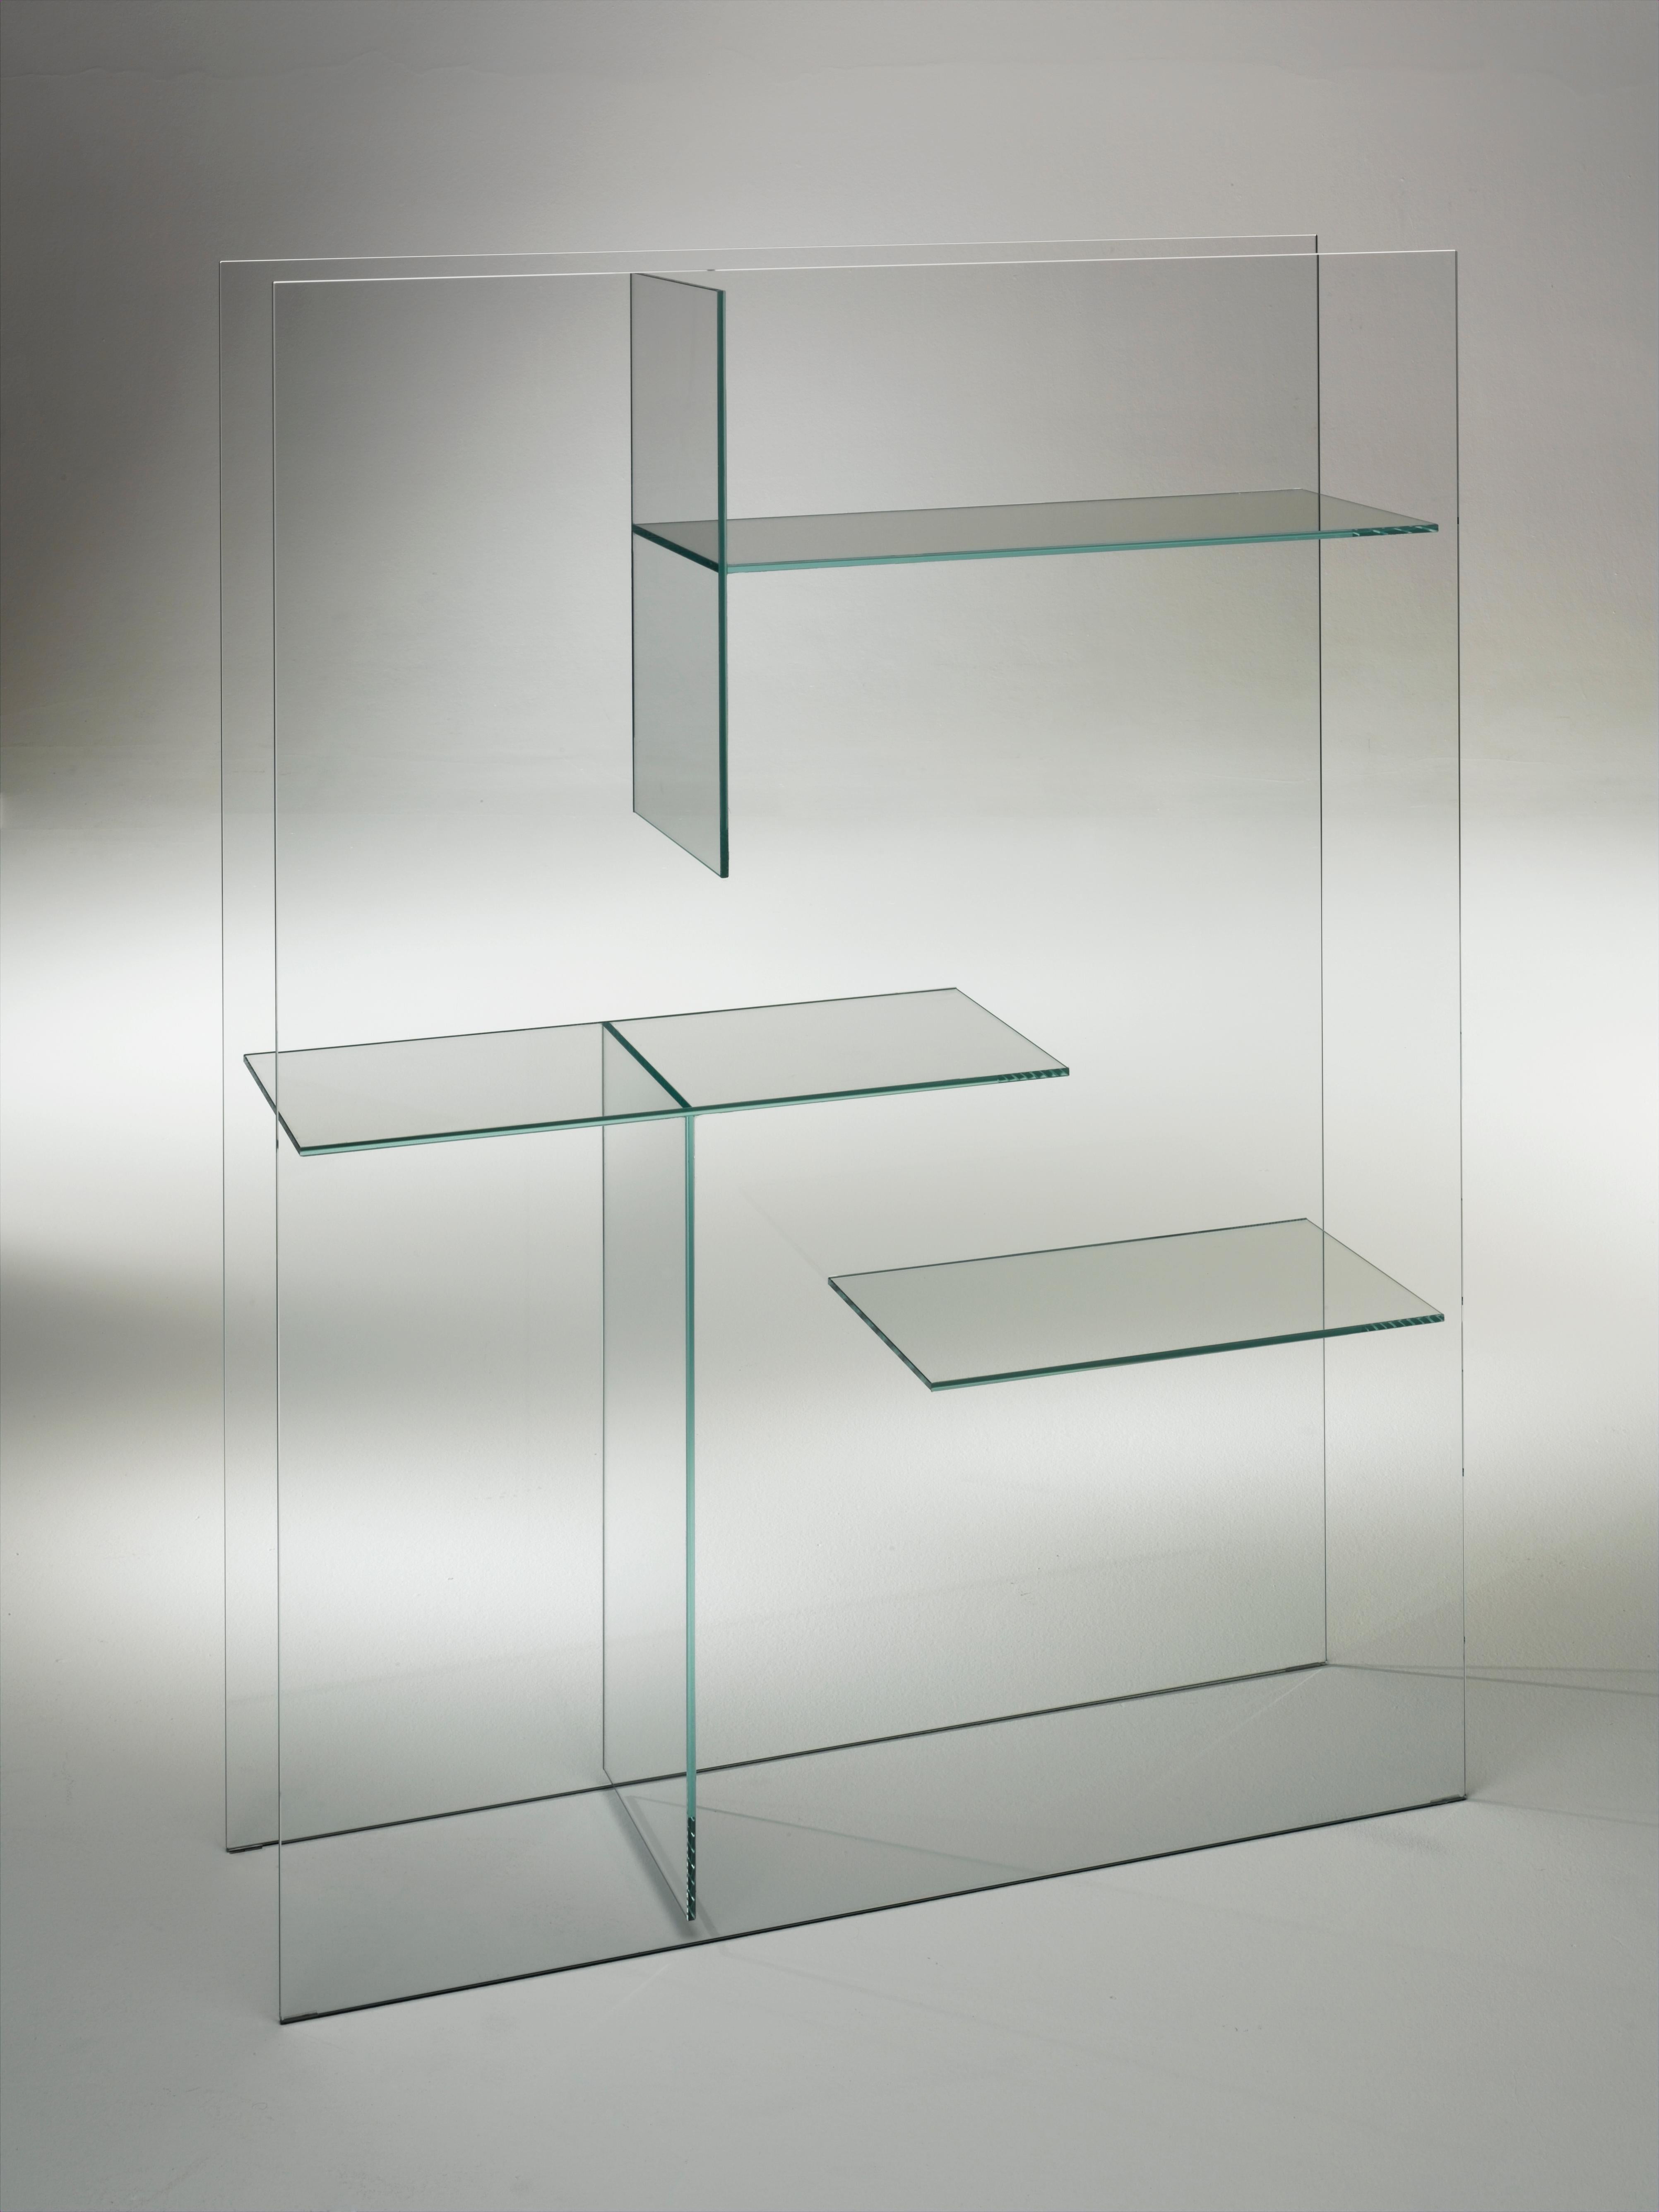 Transfix storage unit is shown here in the transparent extralight glass. Display and storage unit and element dividing and screening the spaces, obtained by gluing slabs of laminated 5+5 mm glass. Available in transparent extralight glass or